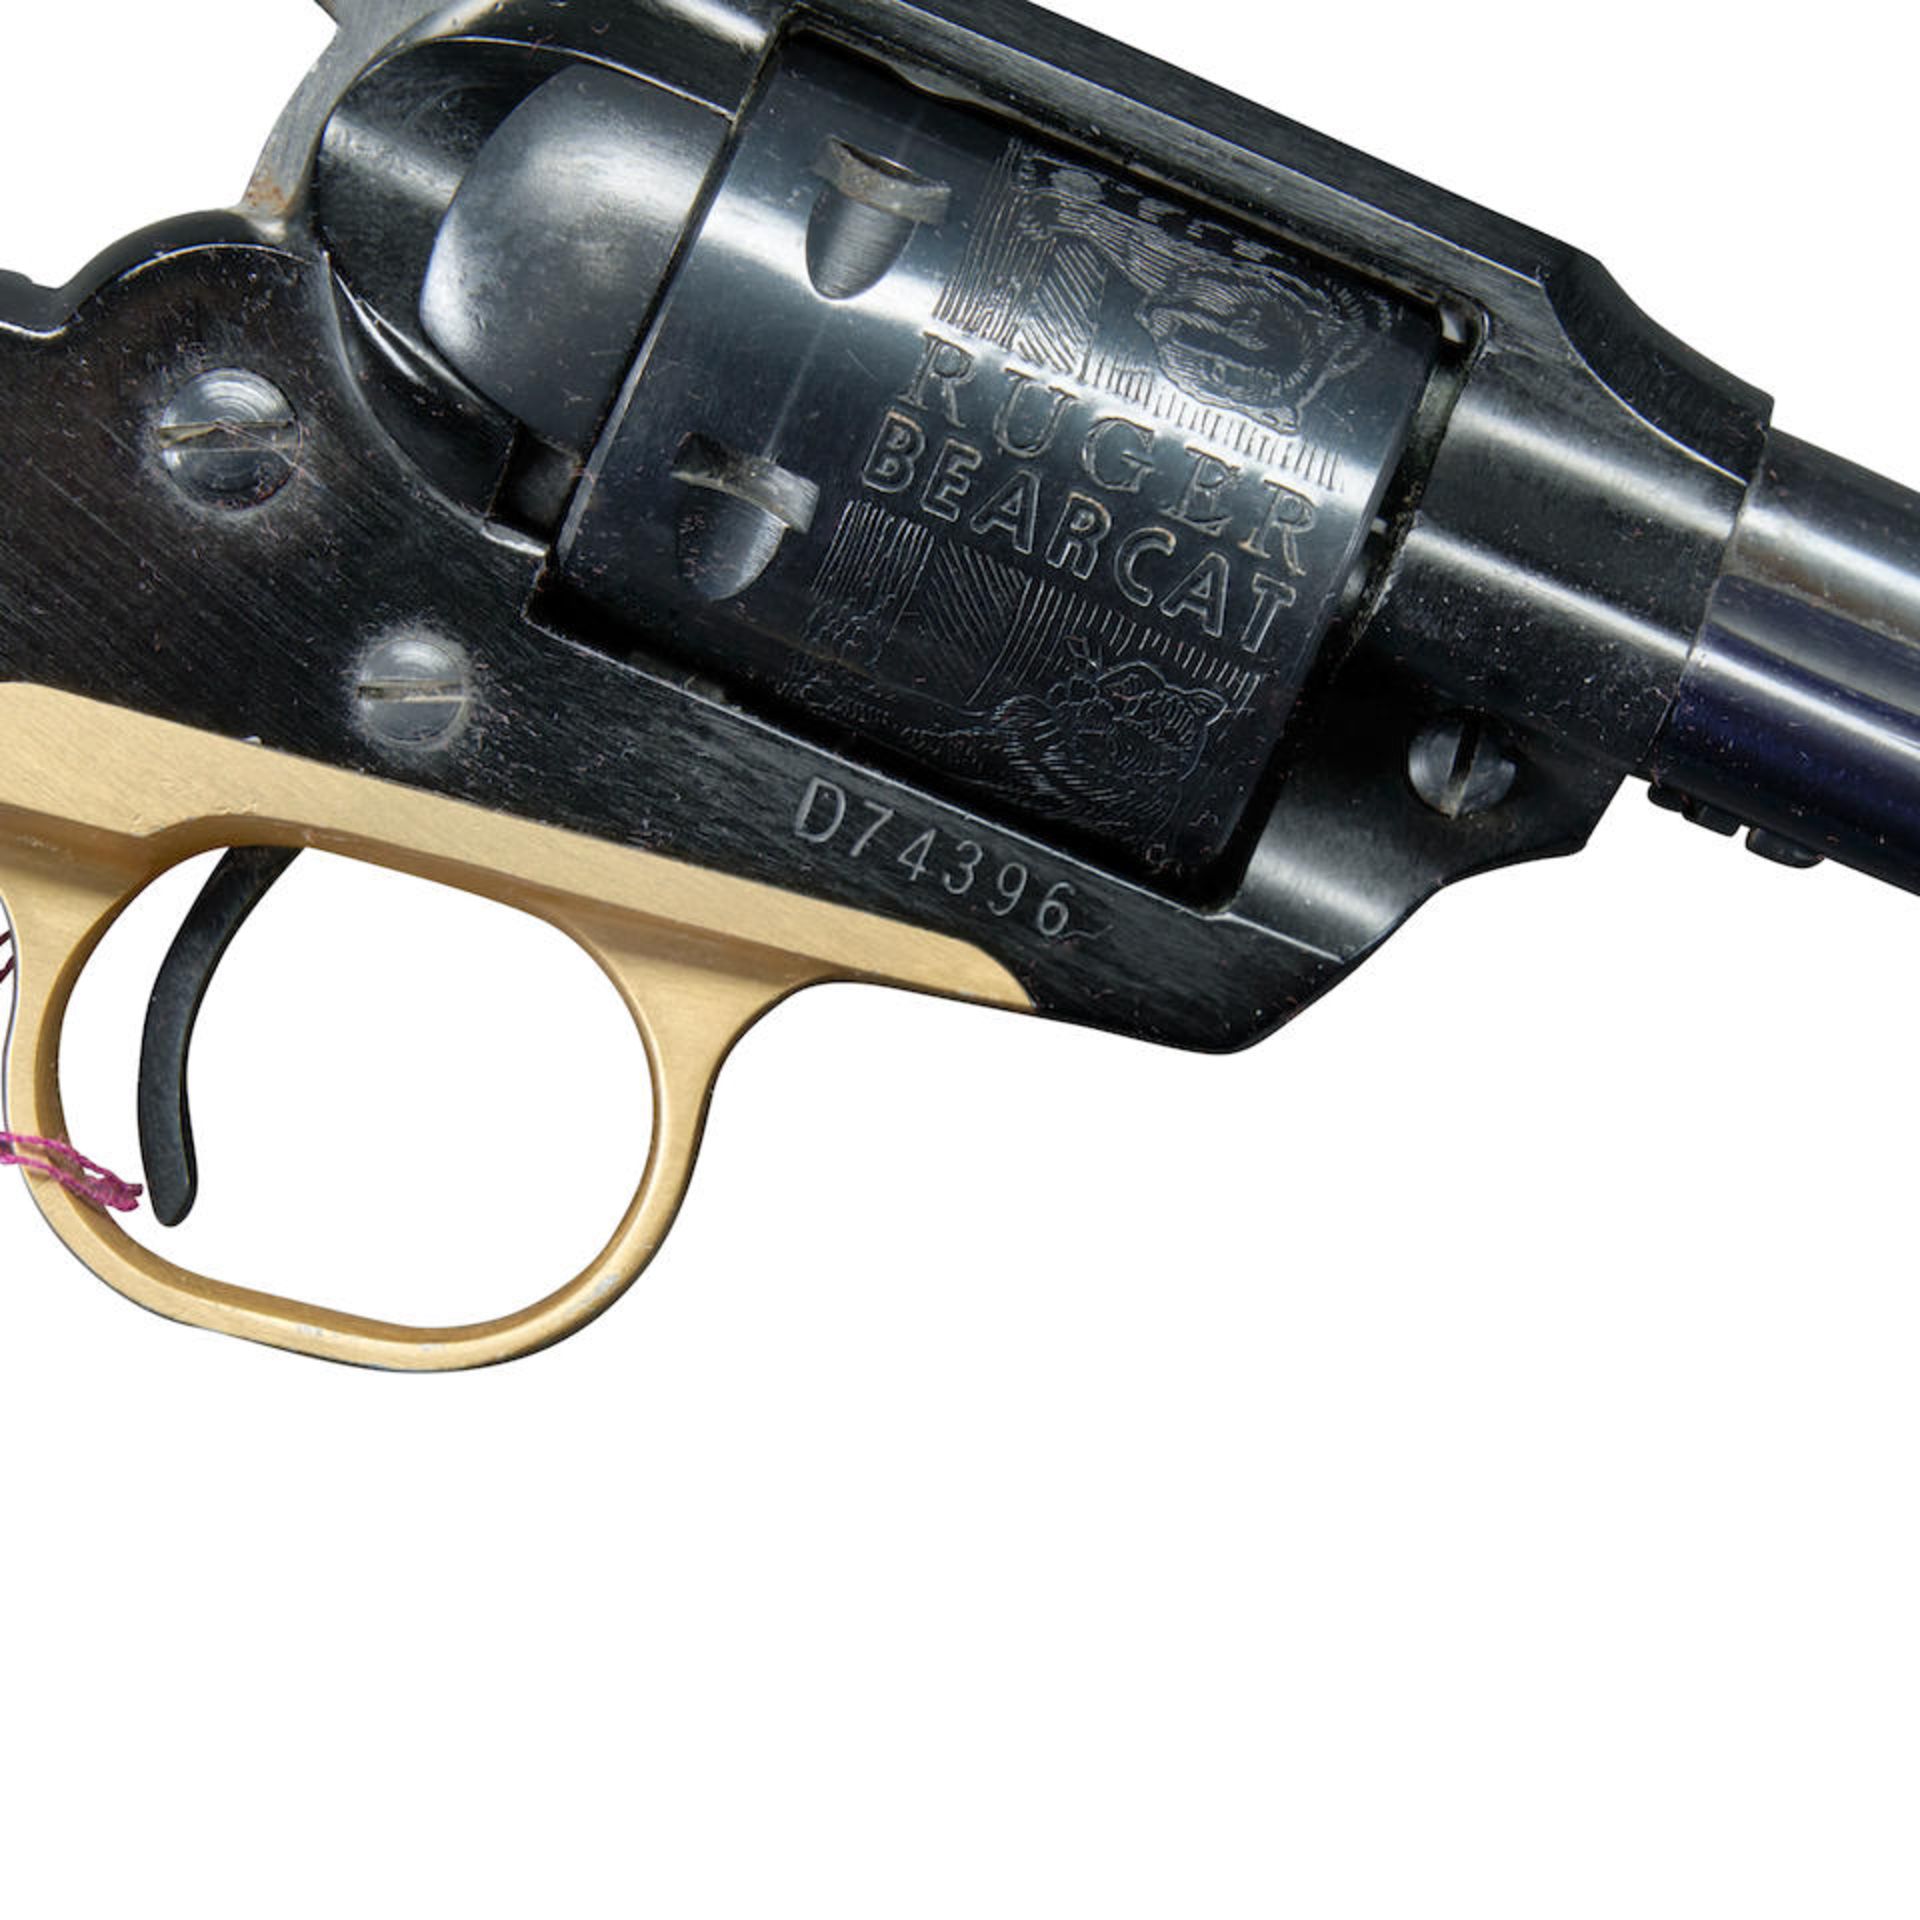 Ruger Bearcat Duplicate Serial Number Single Action Revolver, Curio or Relic firearm - Bild 3 aus 5